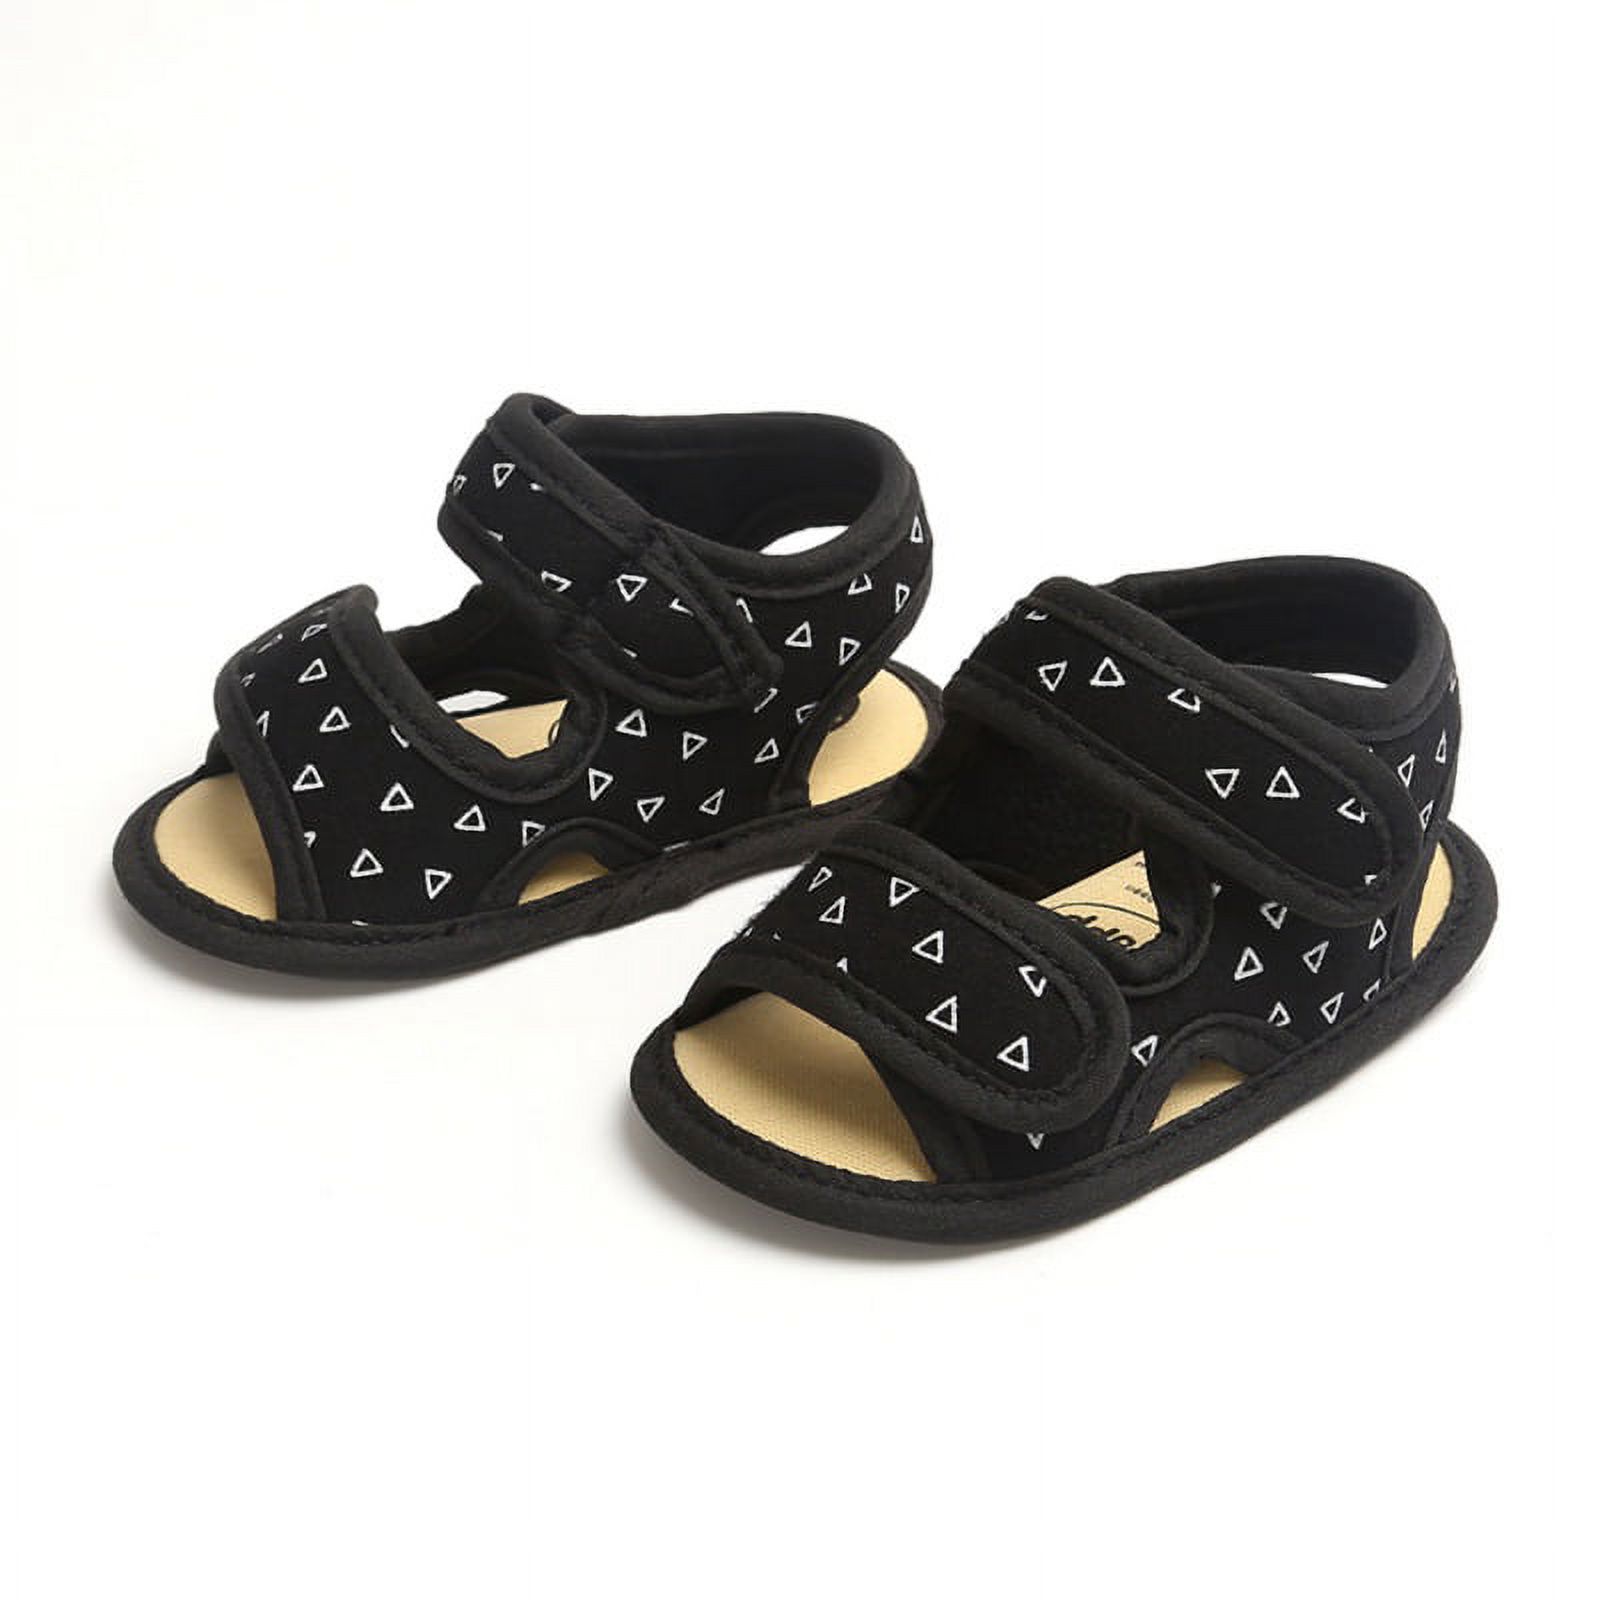 Baby Boys Girls 2 Straps Summer Dress Sandals Infant Shoes Soft Sole Breathable First Walker Newborn Shoes - image 3 of 7